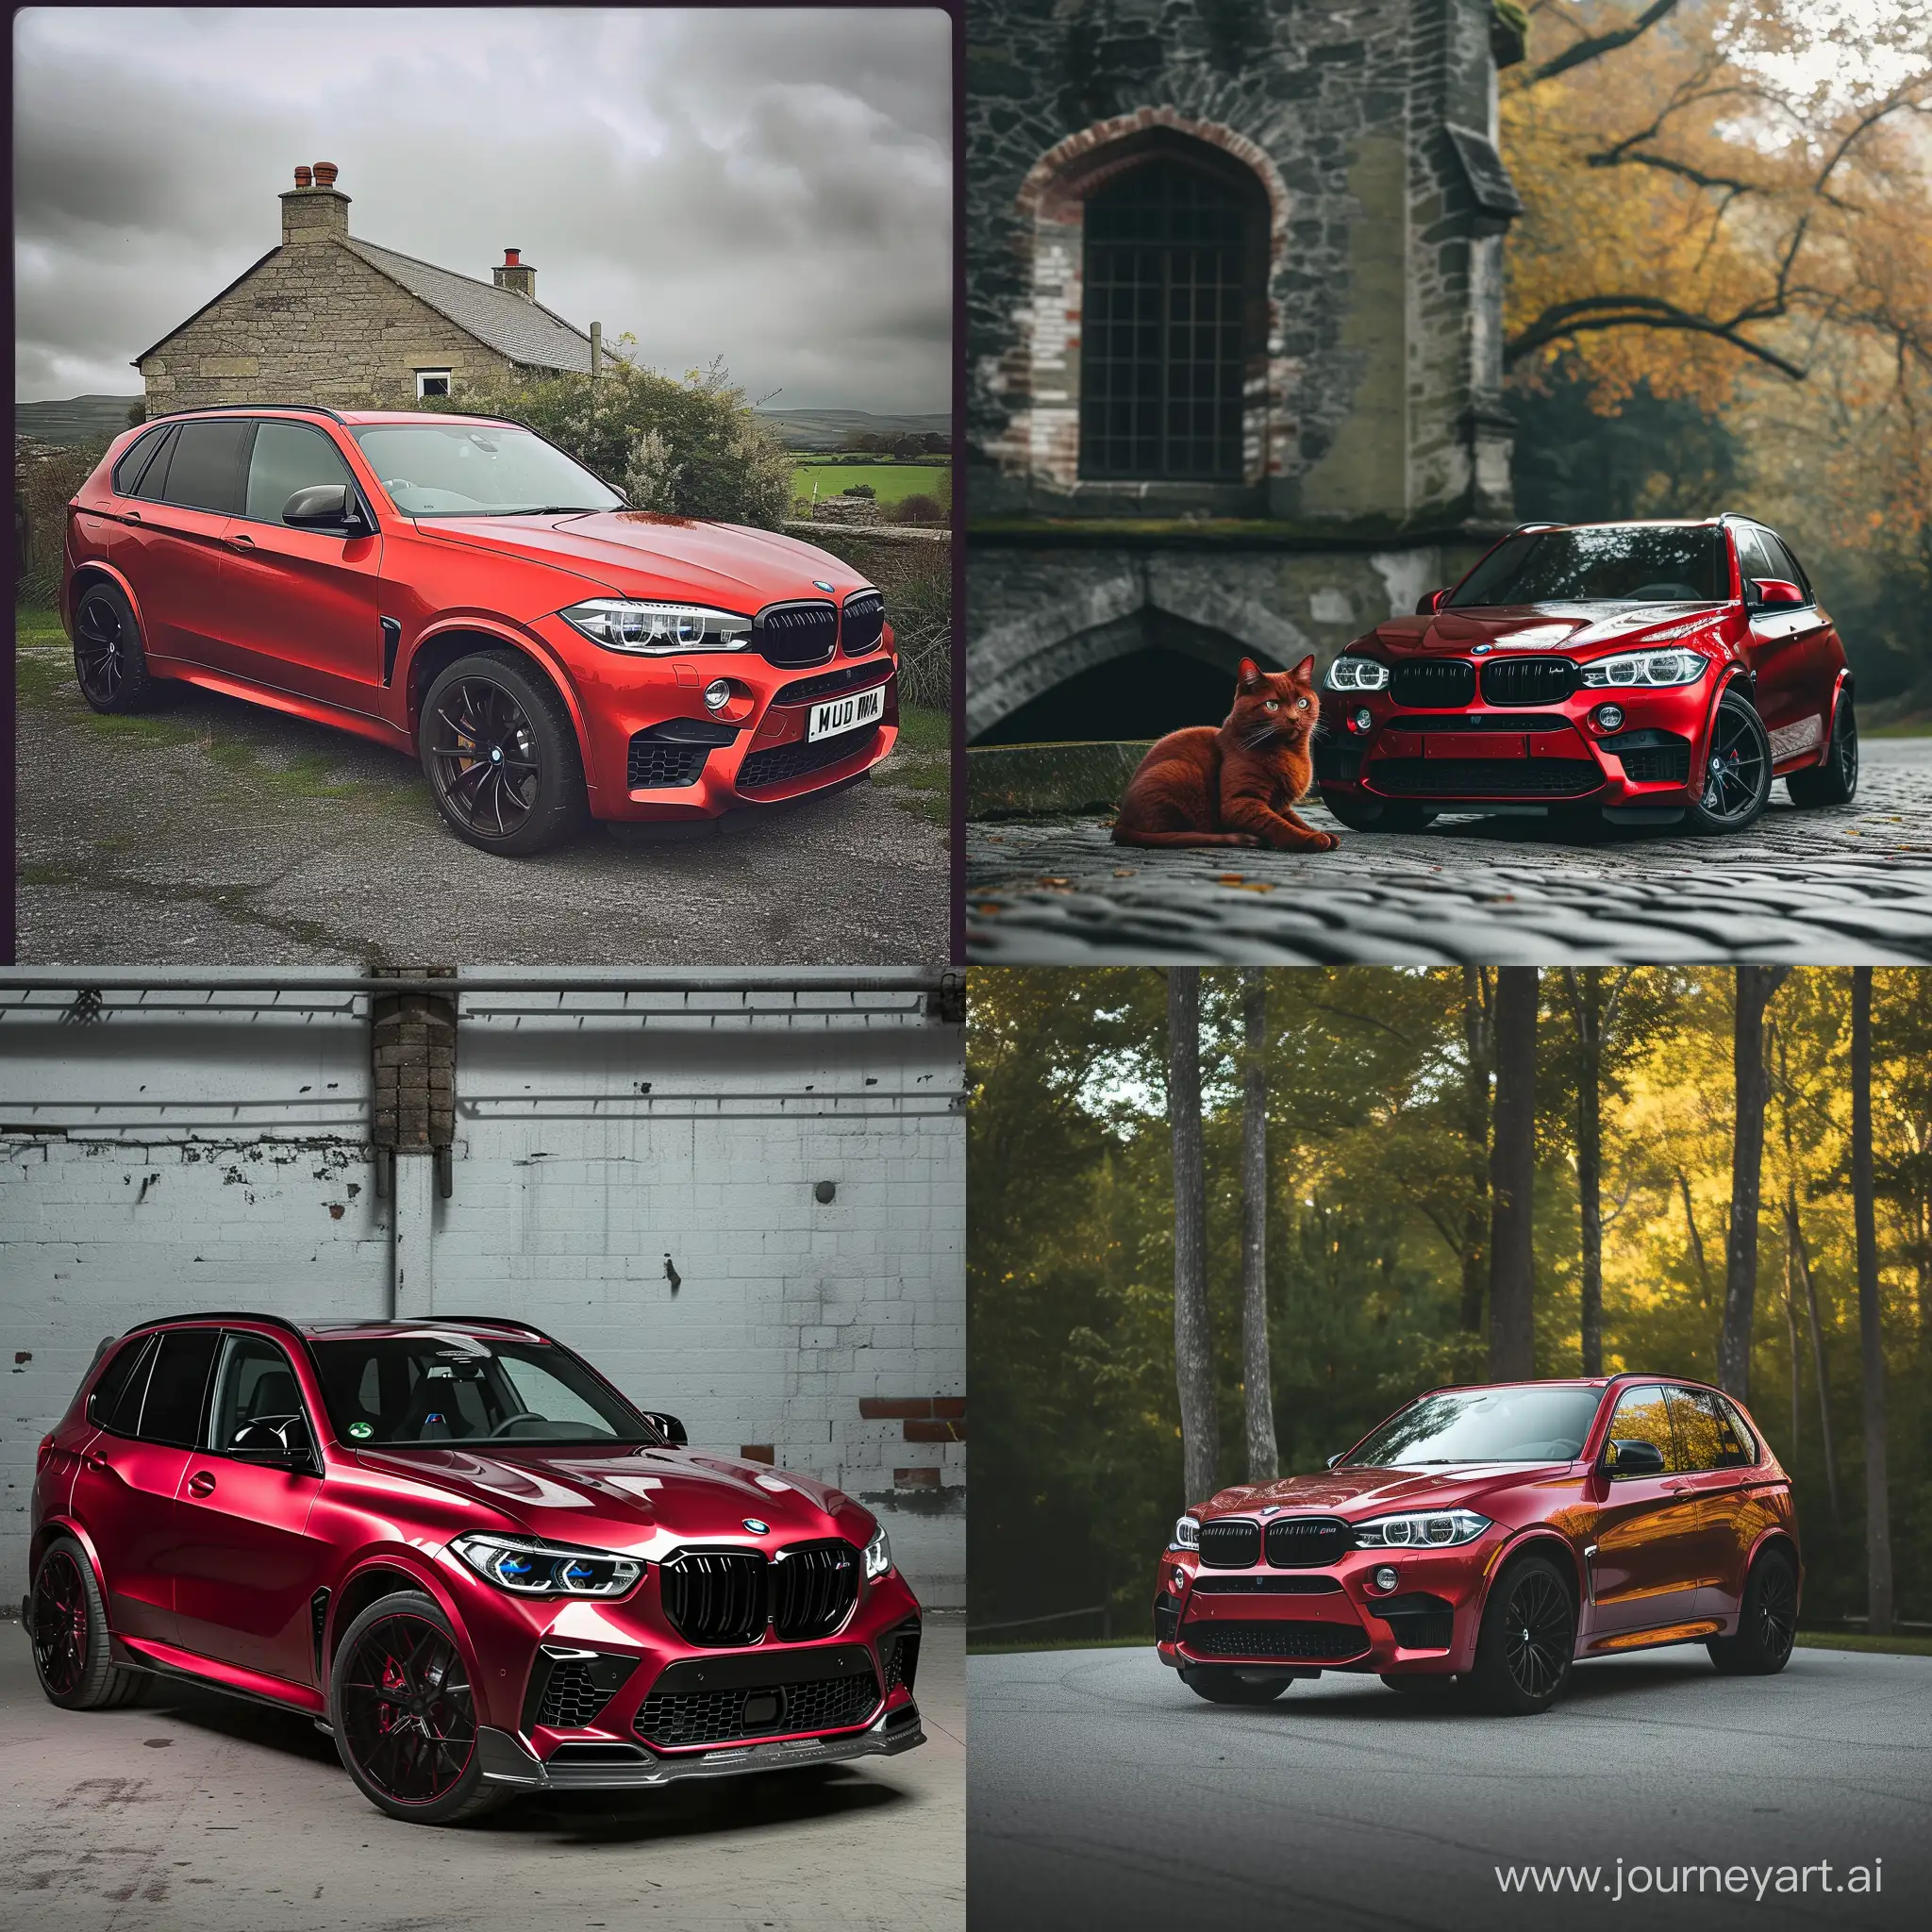 Striking-Red-Cat-in-Stone-Island-and-BMW-X5M